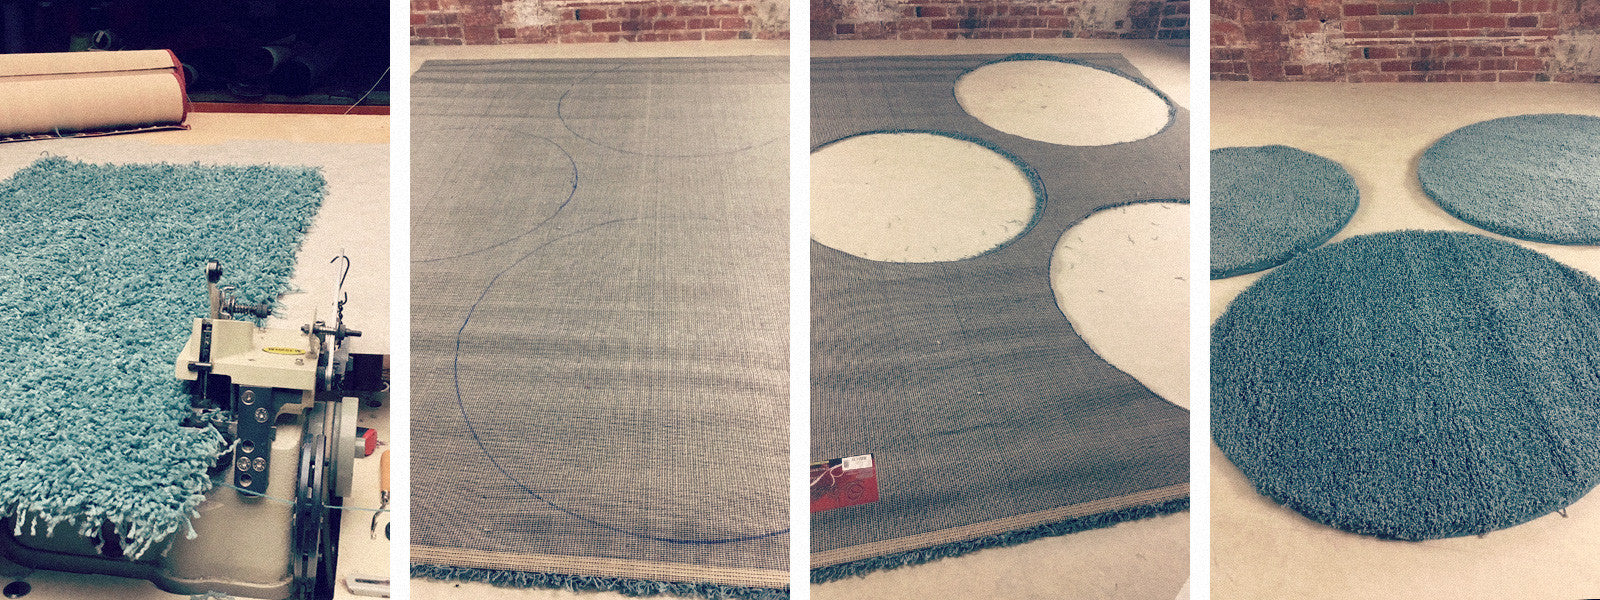 Bespoke rugs from Rugshop